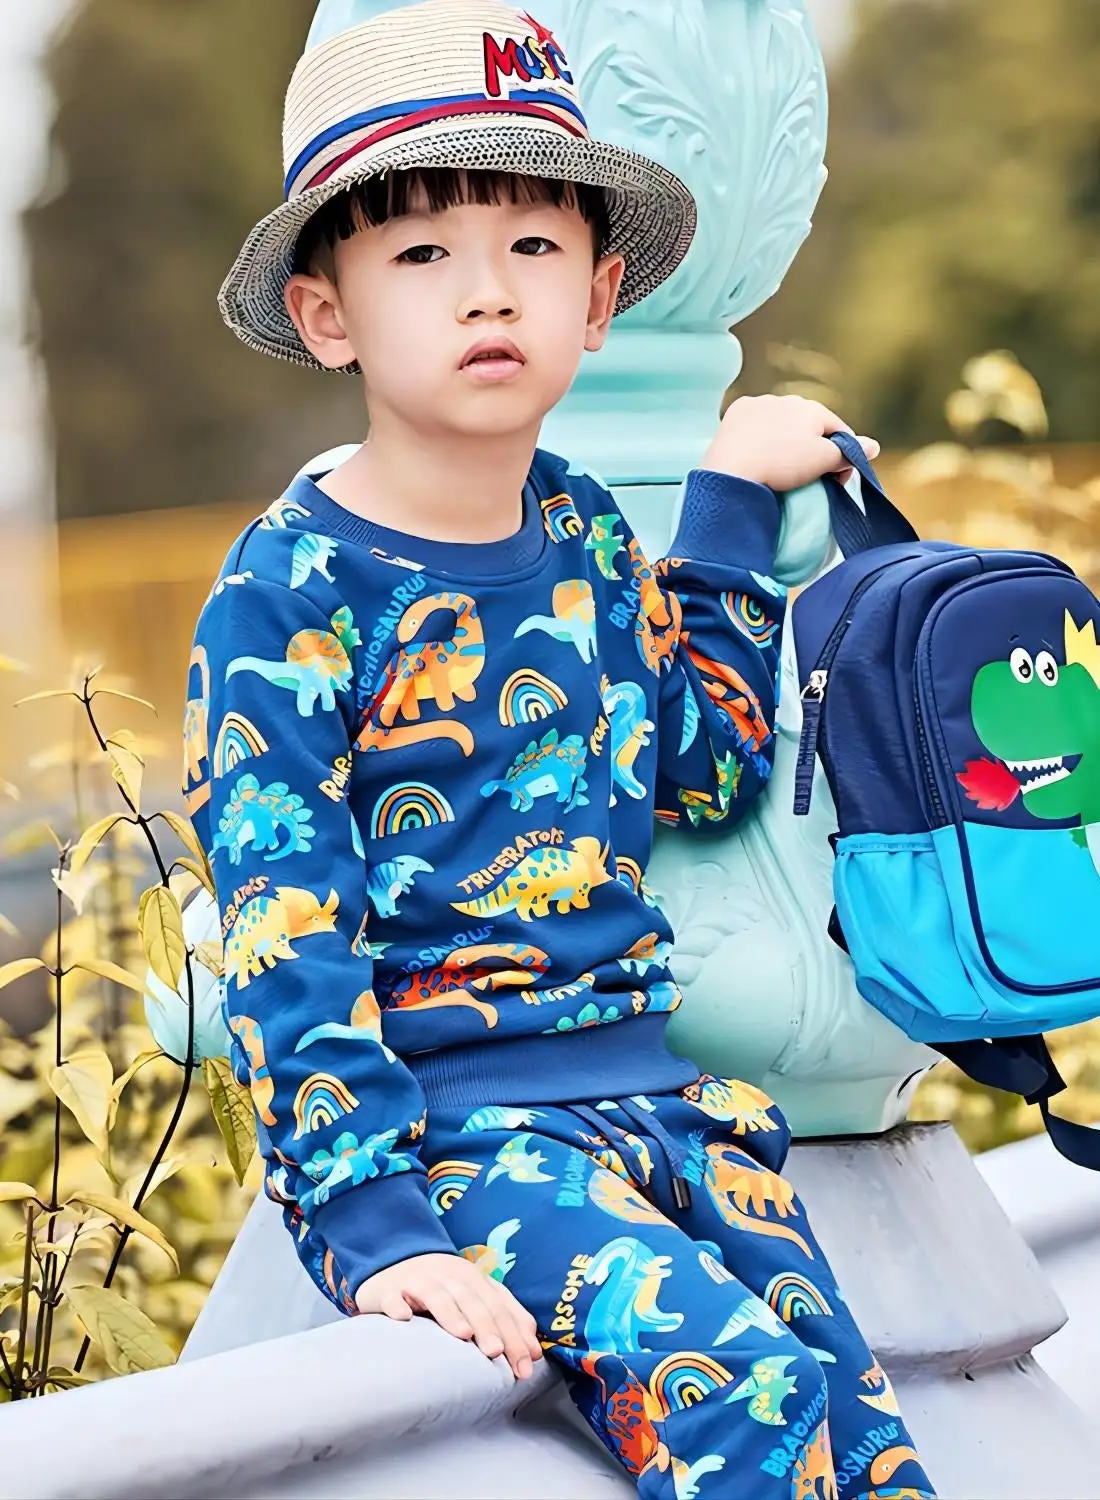 roaiss Boy's Toddler Autumn Pullover Sweater Children's Popular Round Neck Sweatshirt Kids Dinosaur Graphic Clothing Long Sleeve Tops Pure Cotton Fall Winter Outfit Blue